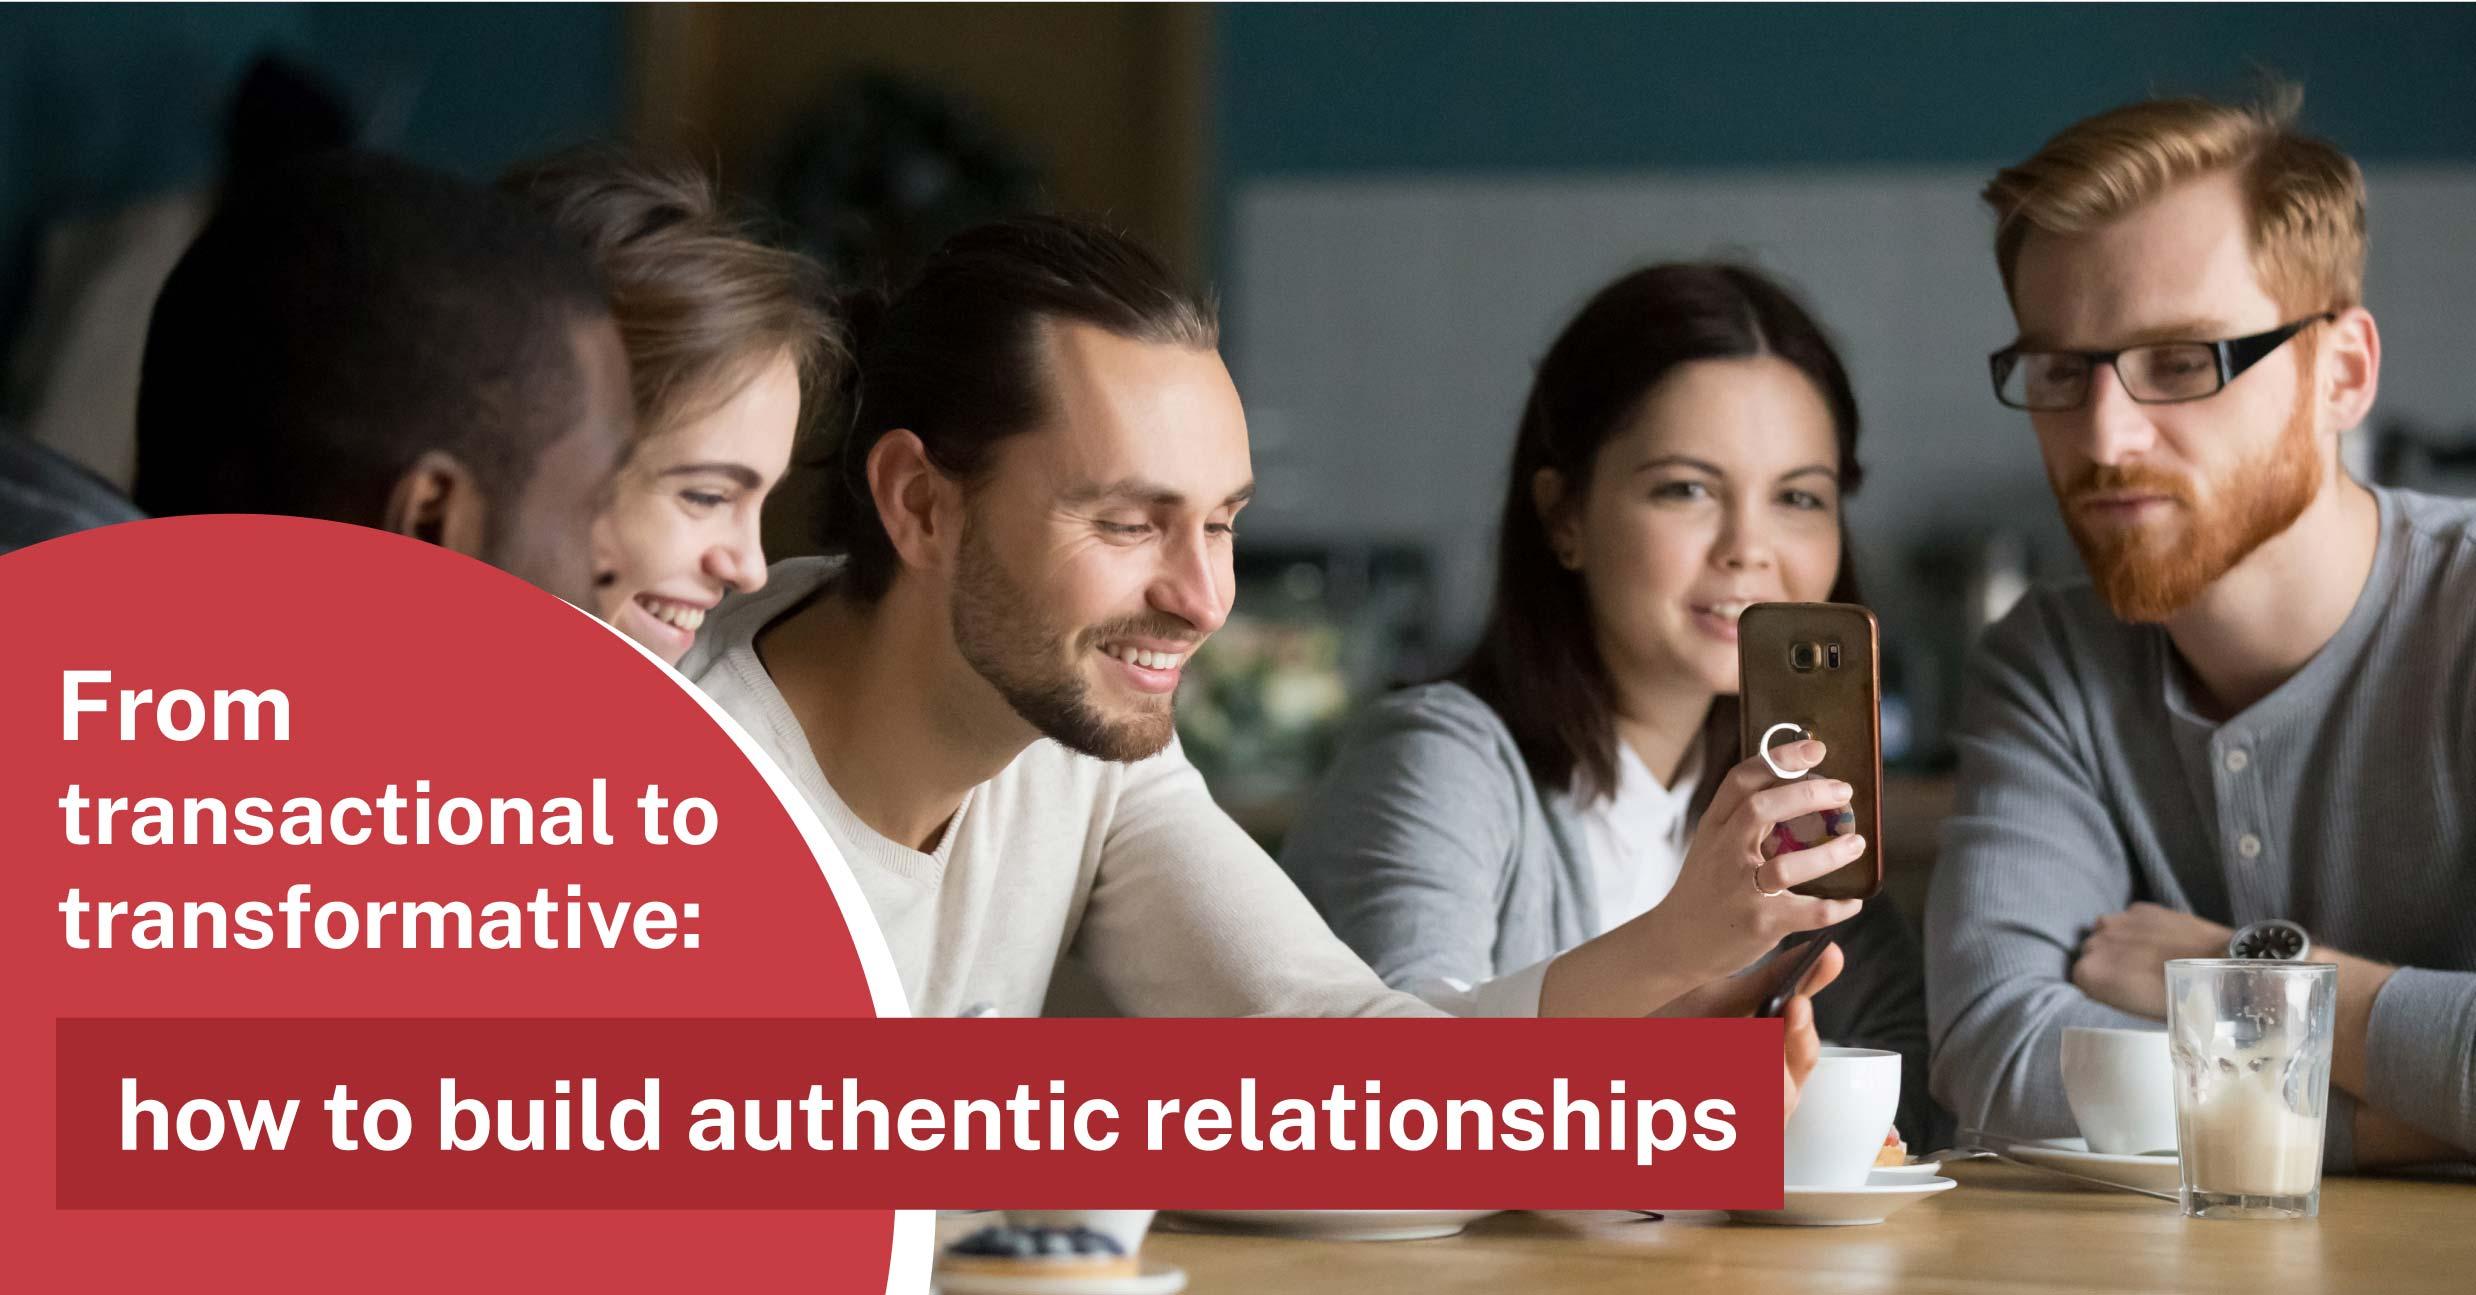 From transactional to transformative: how to build authentic relationships